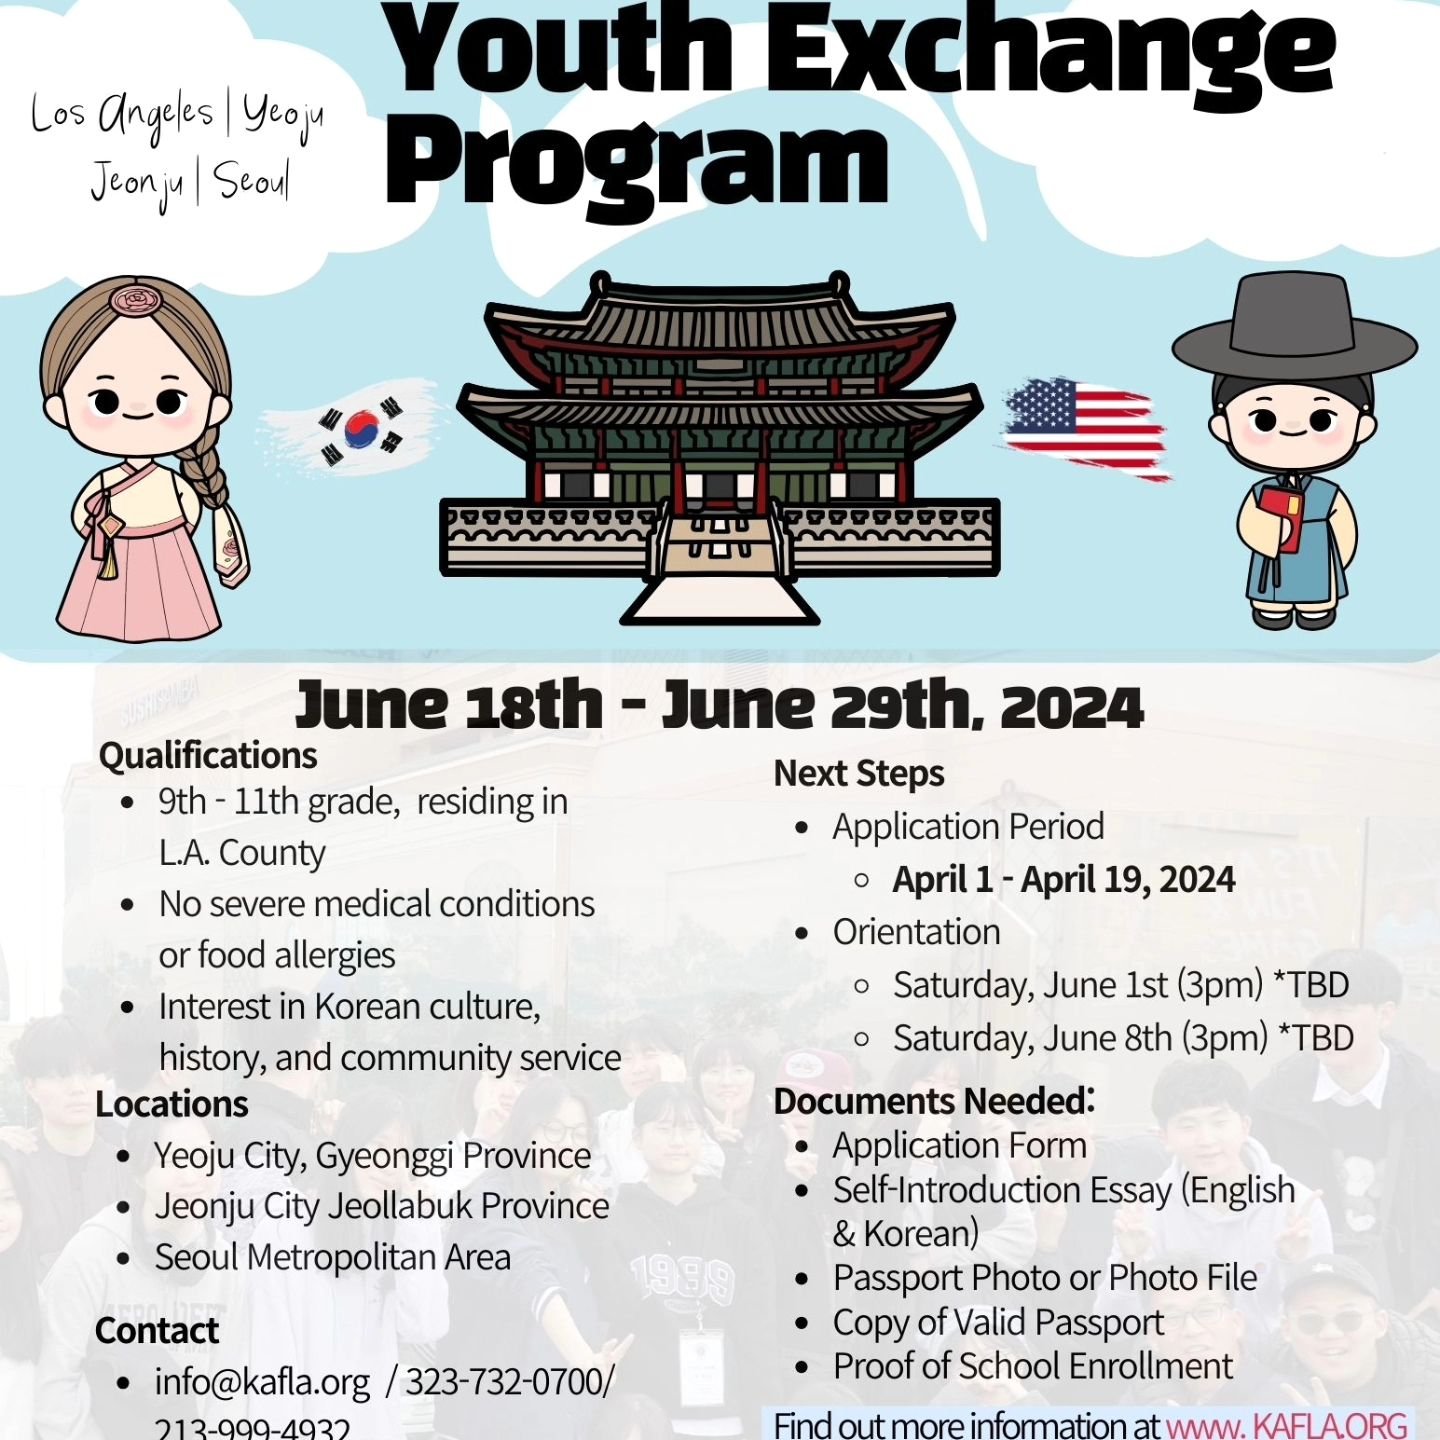 Check out our 2024 Youth Exchange Program. Our program aims to provide 40 Los Angeles high school students a cultural immersion experience in the cities of Yeoju, Jeonju, and Seoul, South Korea.

Please visit kafla.info for the application and more i